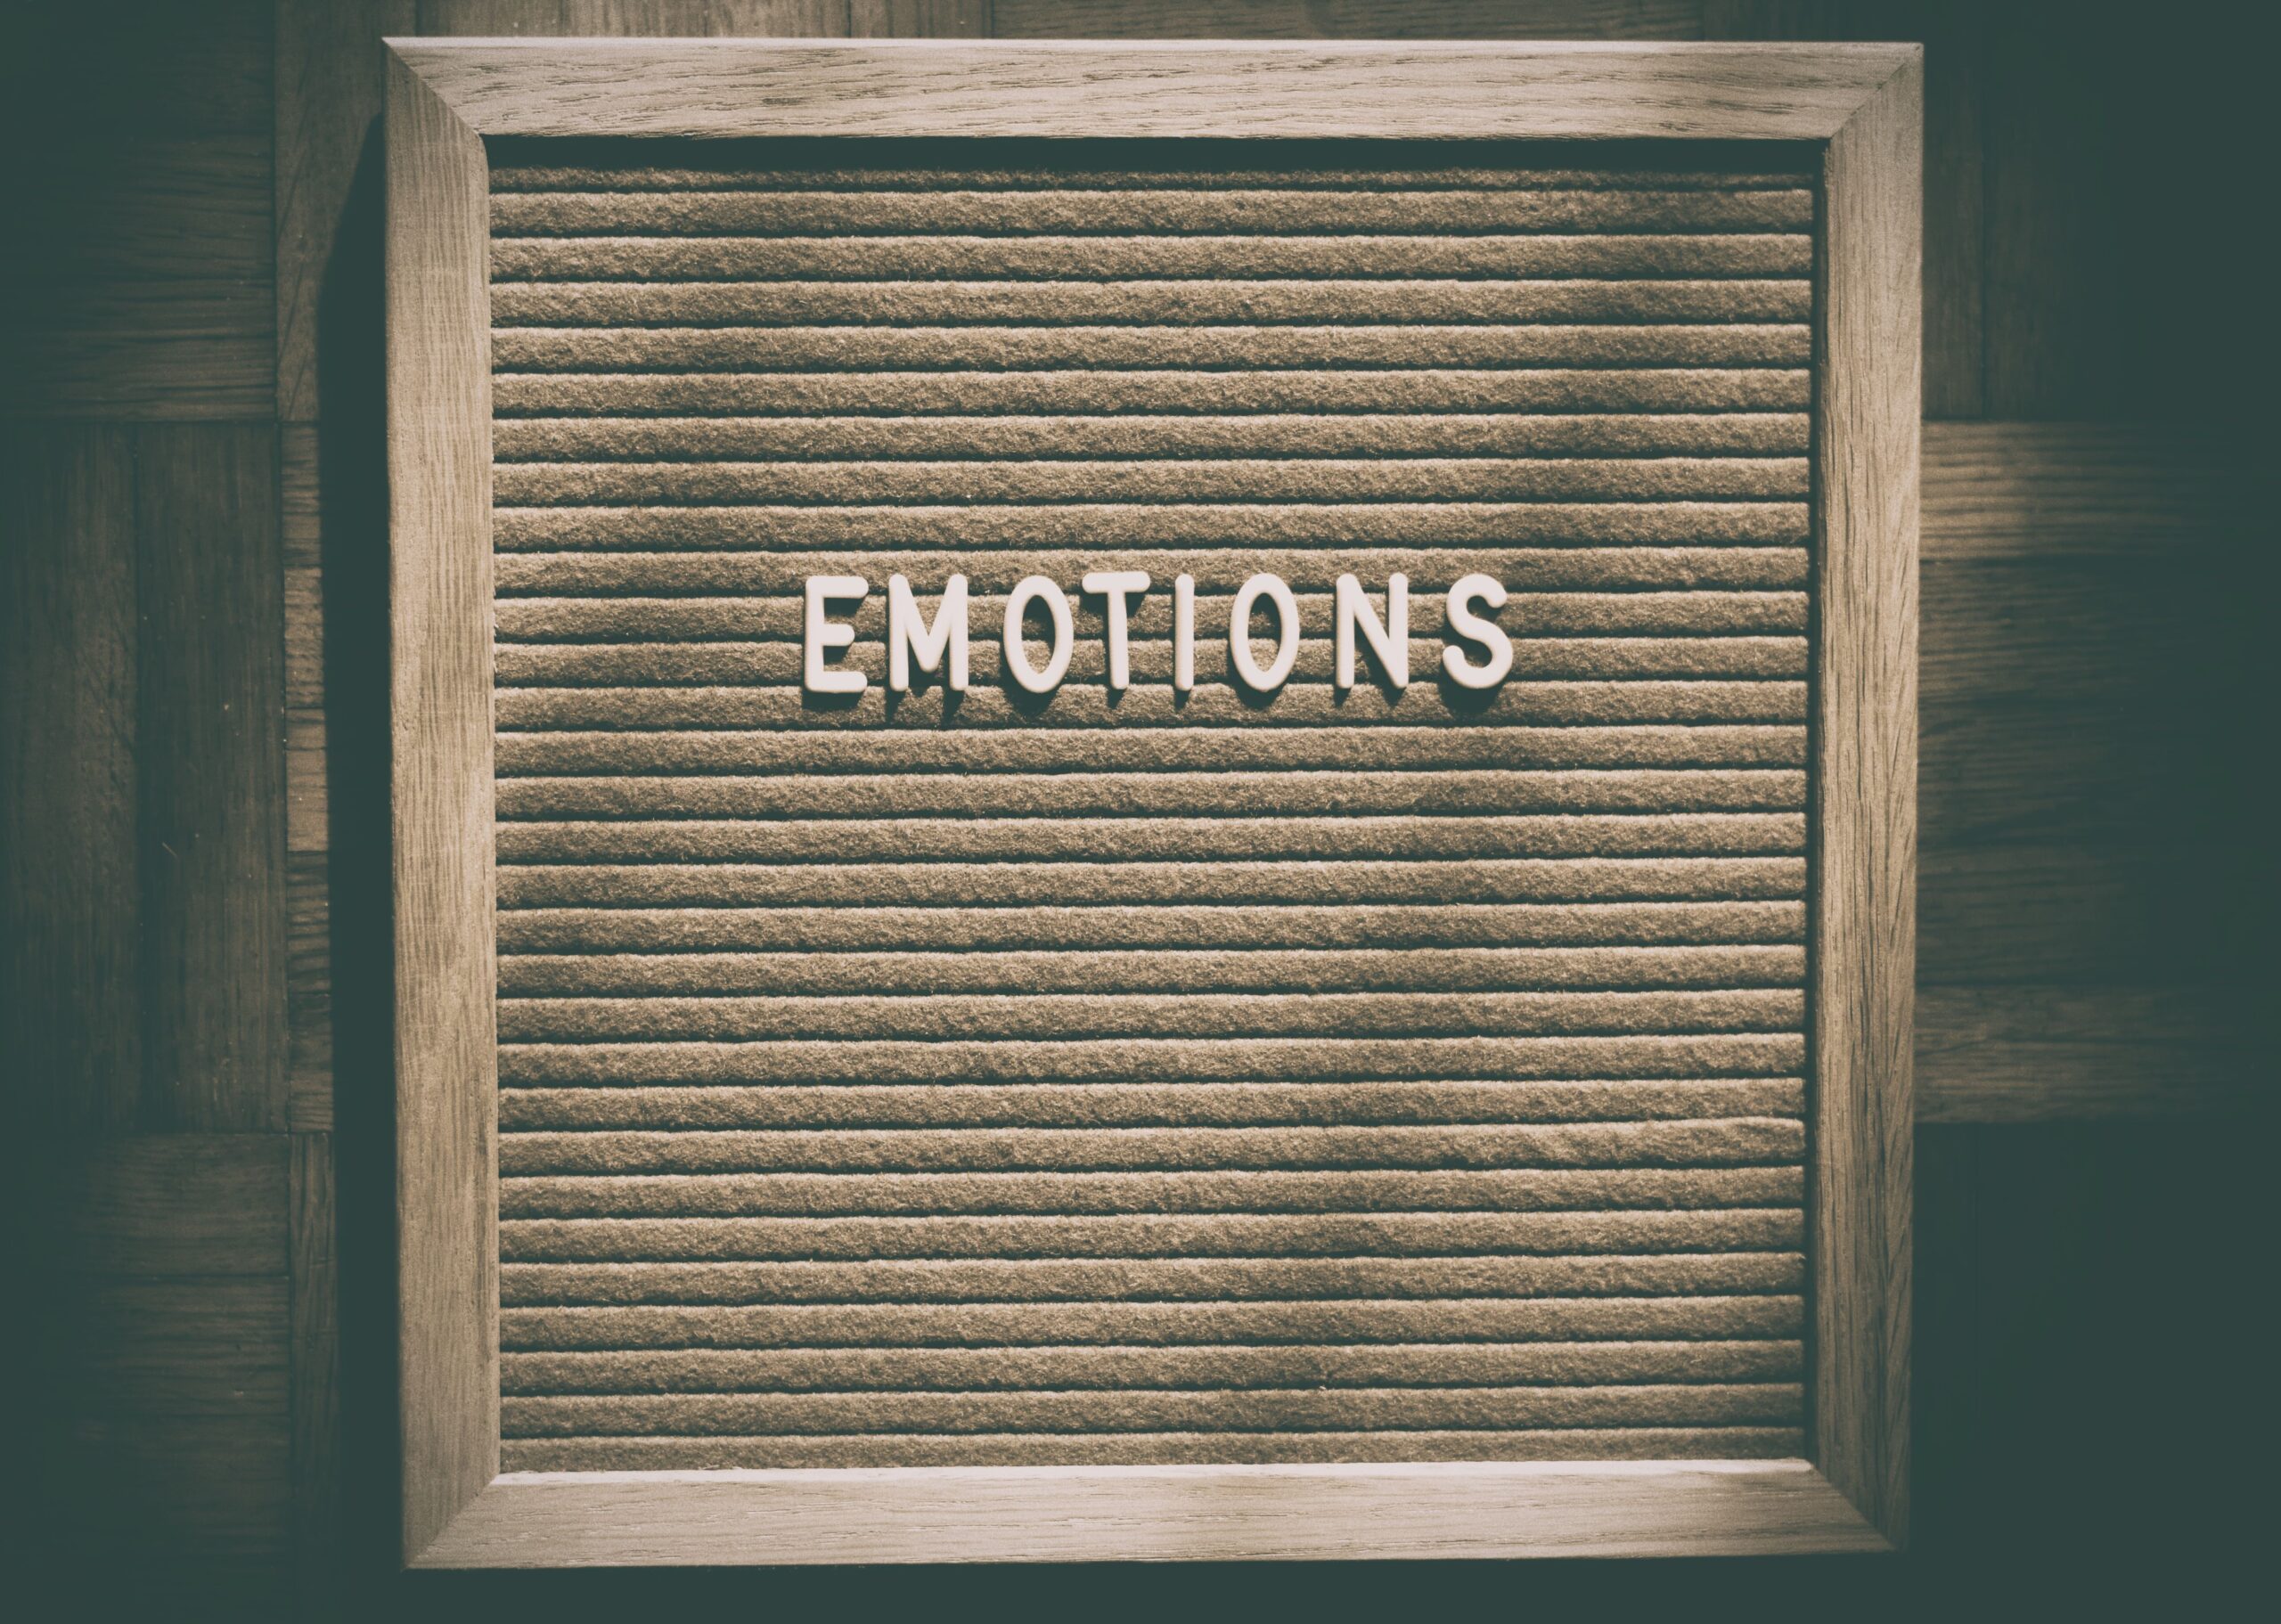 emotional awareness. A picture with the word emotion on it